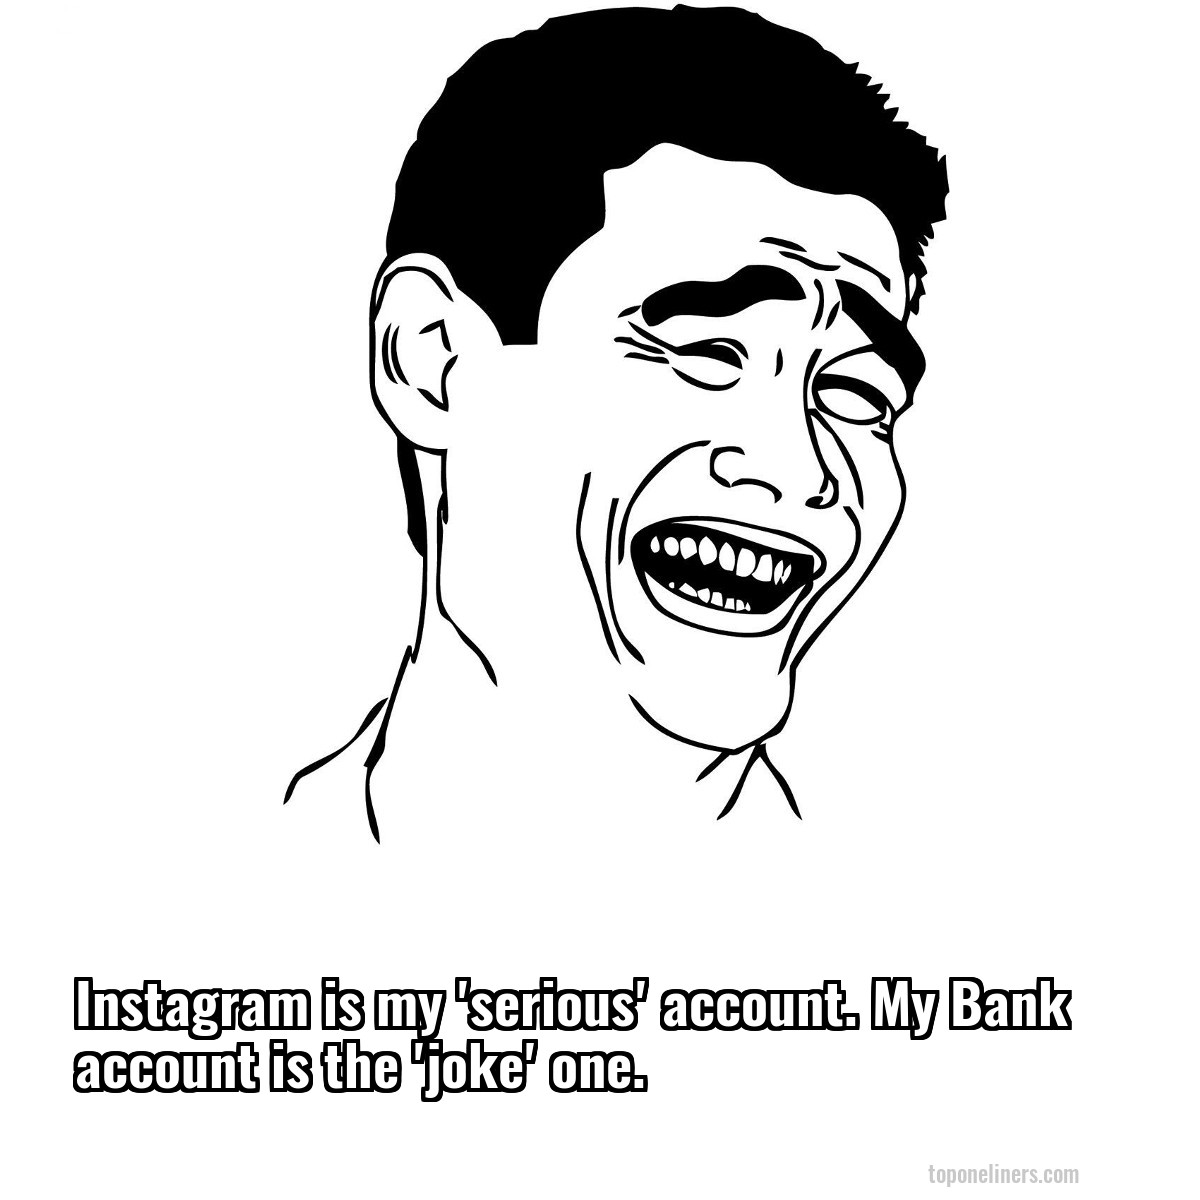 Instagram is my 'serious' account. My Bank account is the 'joke' one.
